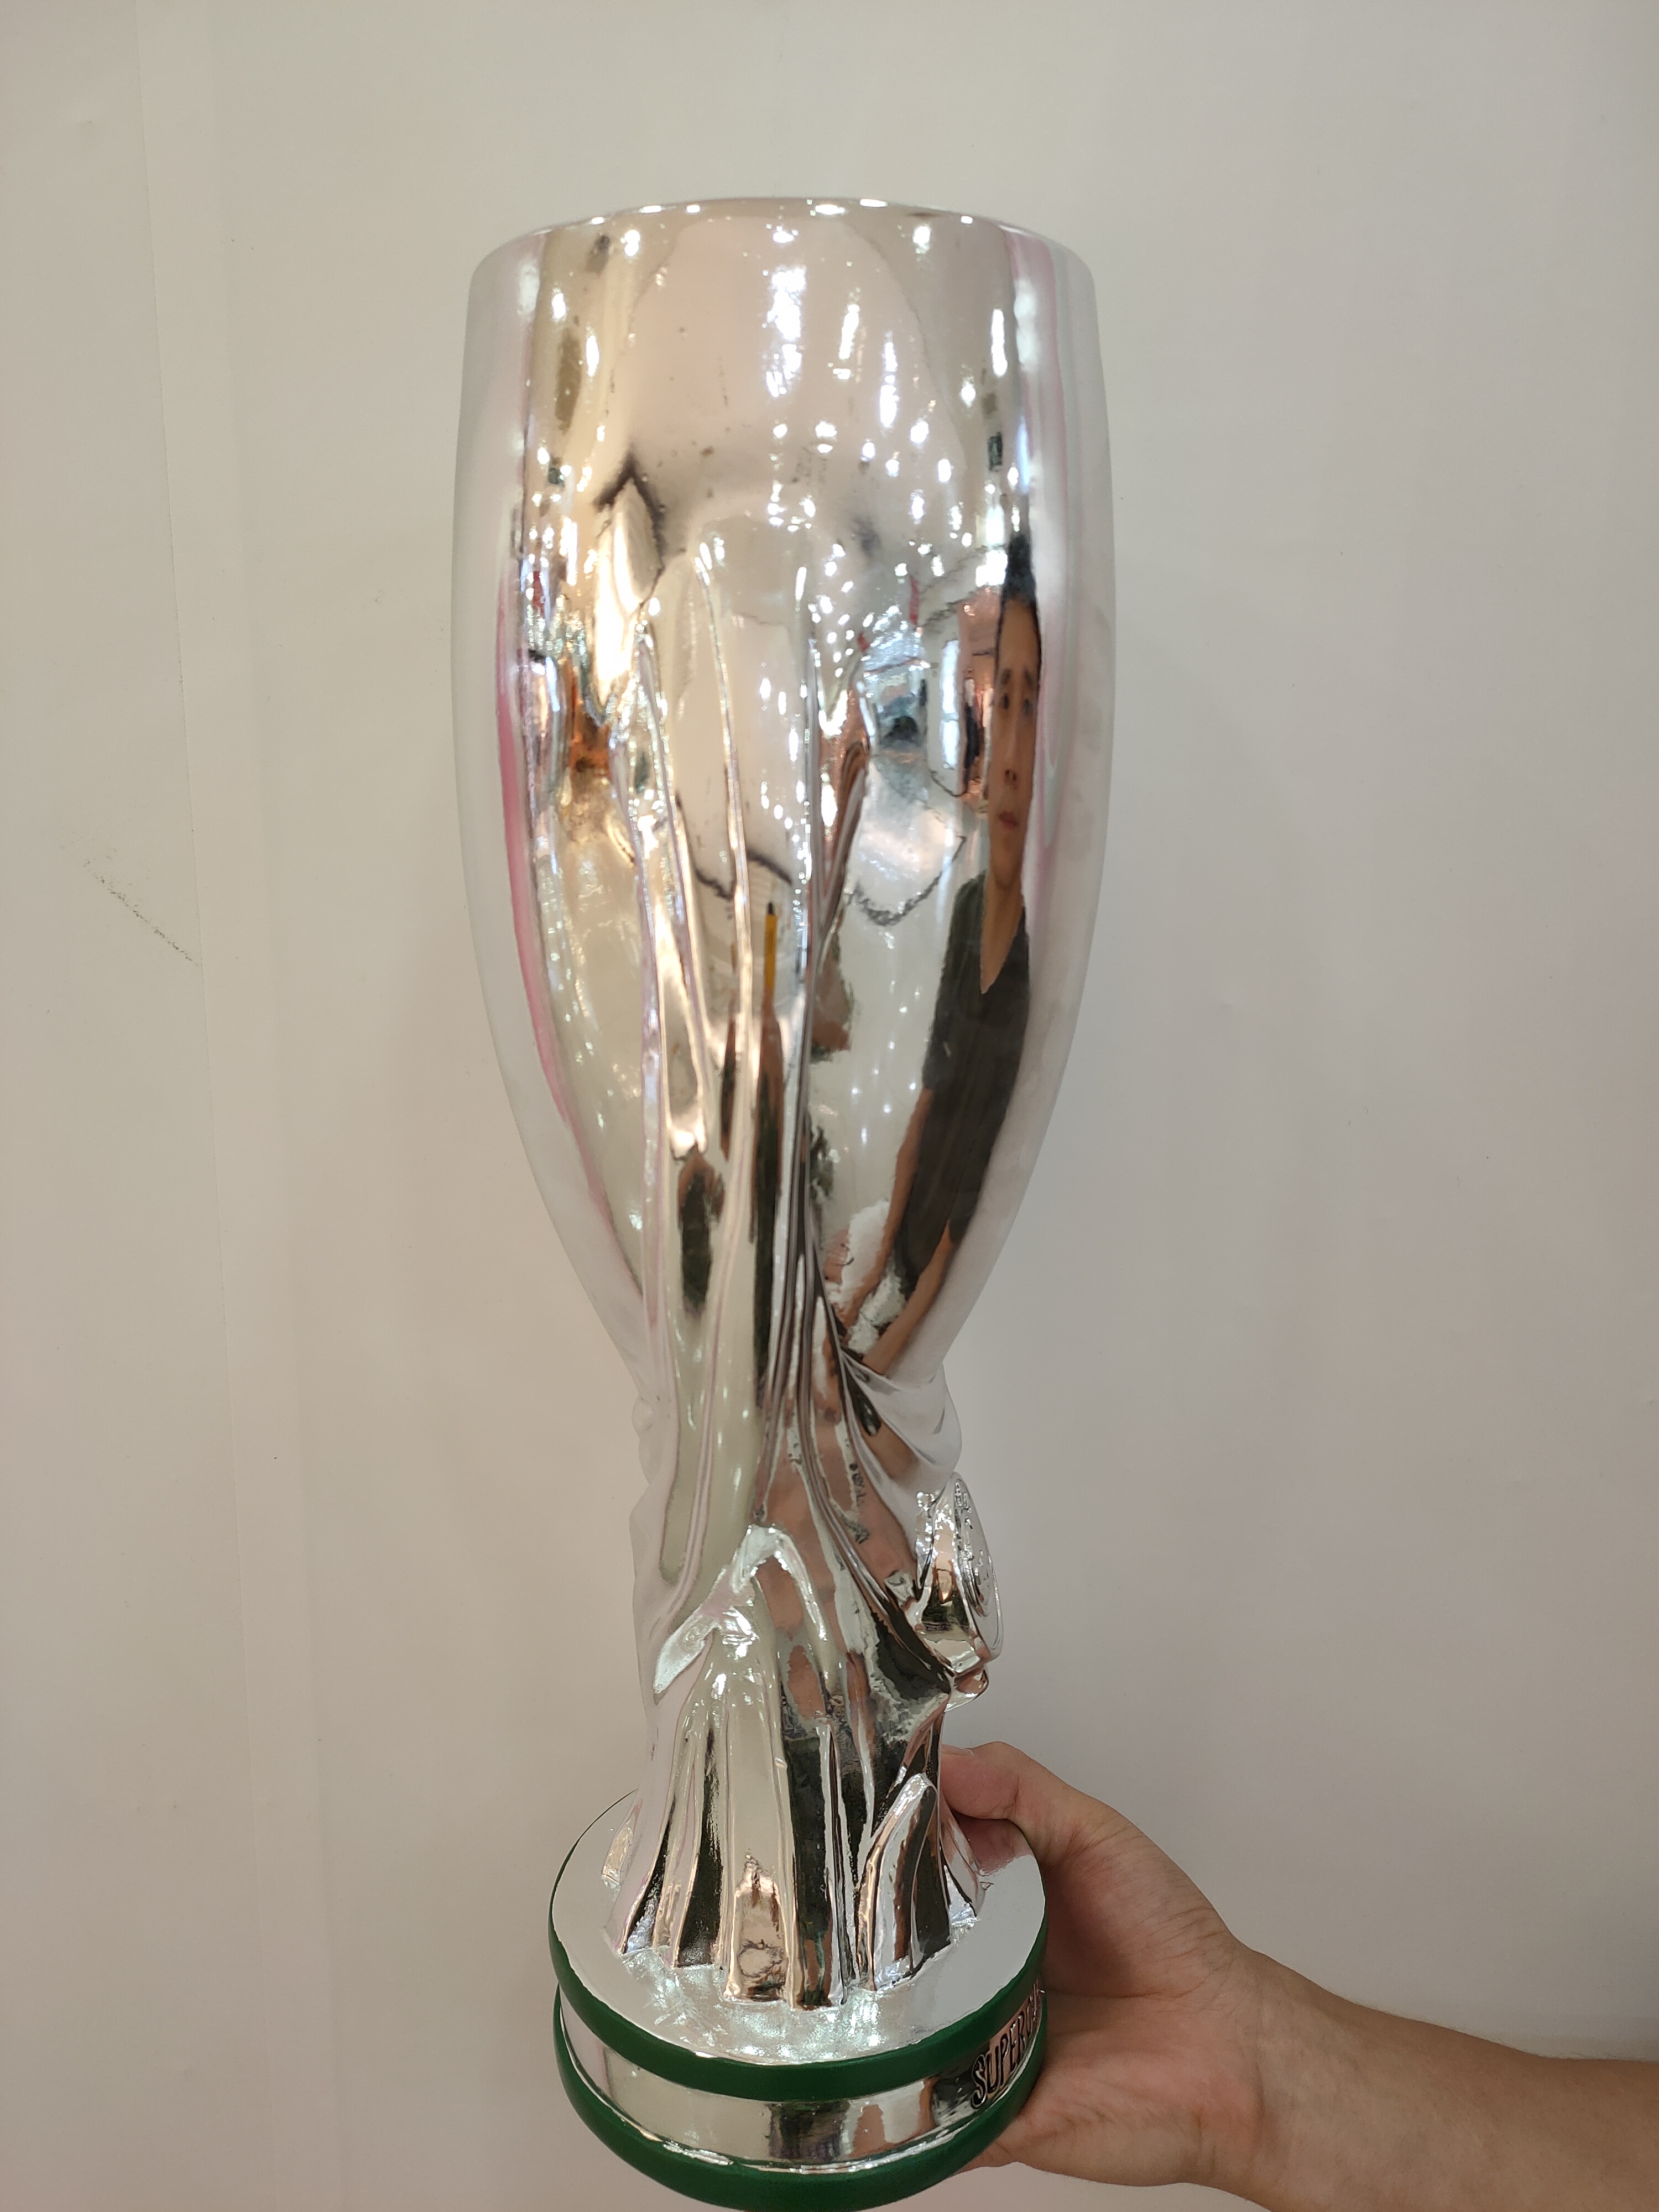 The Super Cup trophy The Champions trophy cup nice gift for Soccer Souvenirs Award